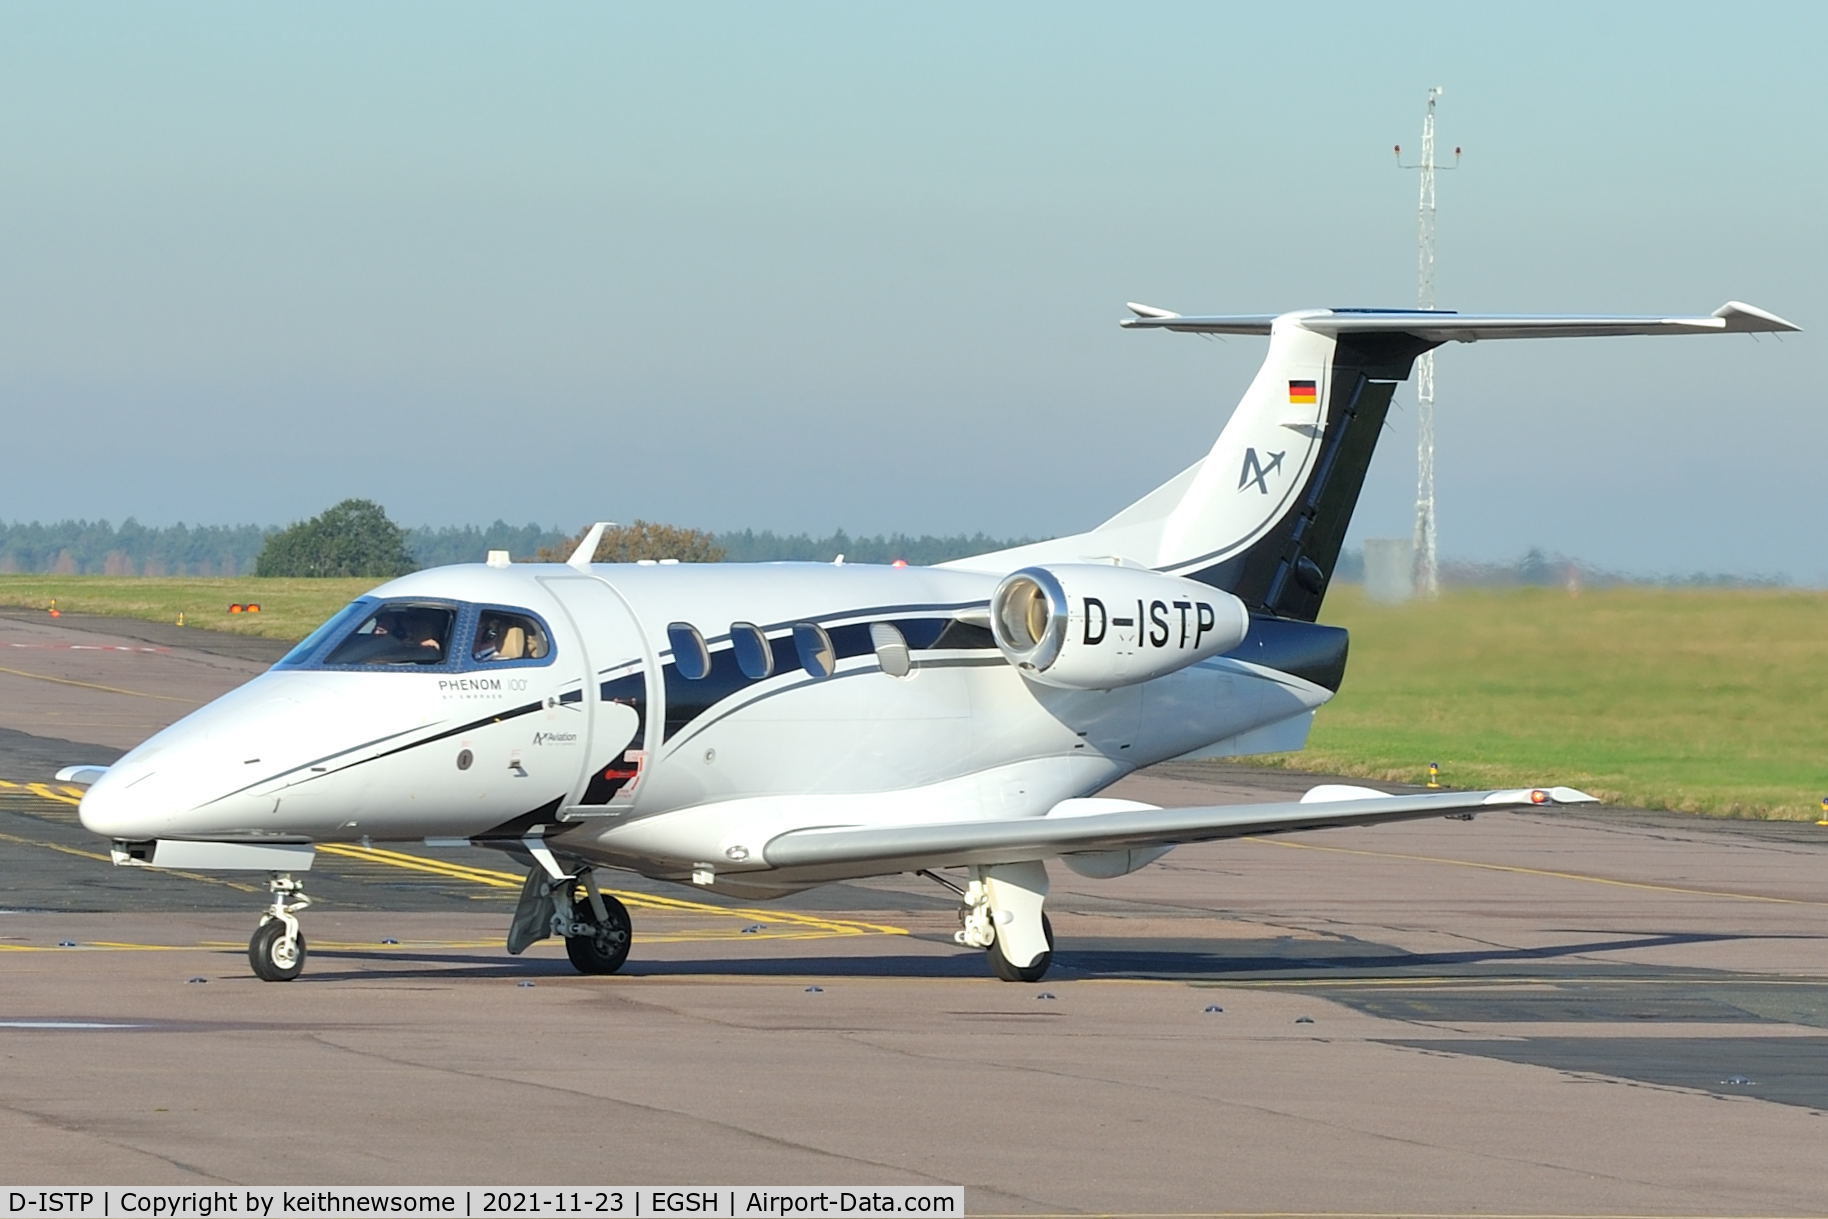 D-ISTP, 2010 Embraer EMB-500 Phenom 100 C/N 50000147, Arriving at Norwich.